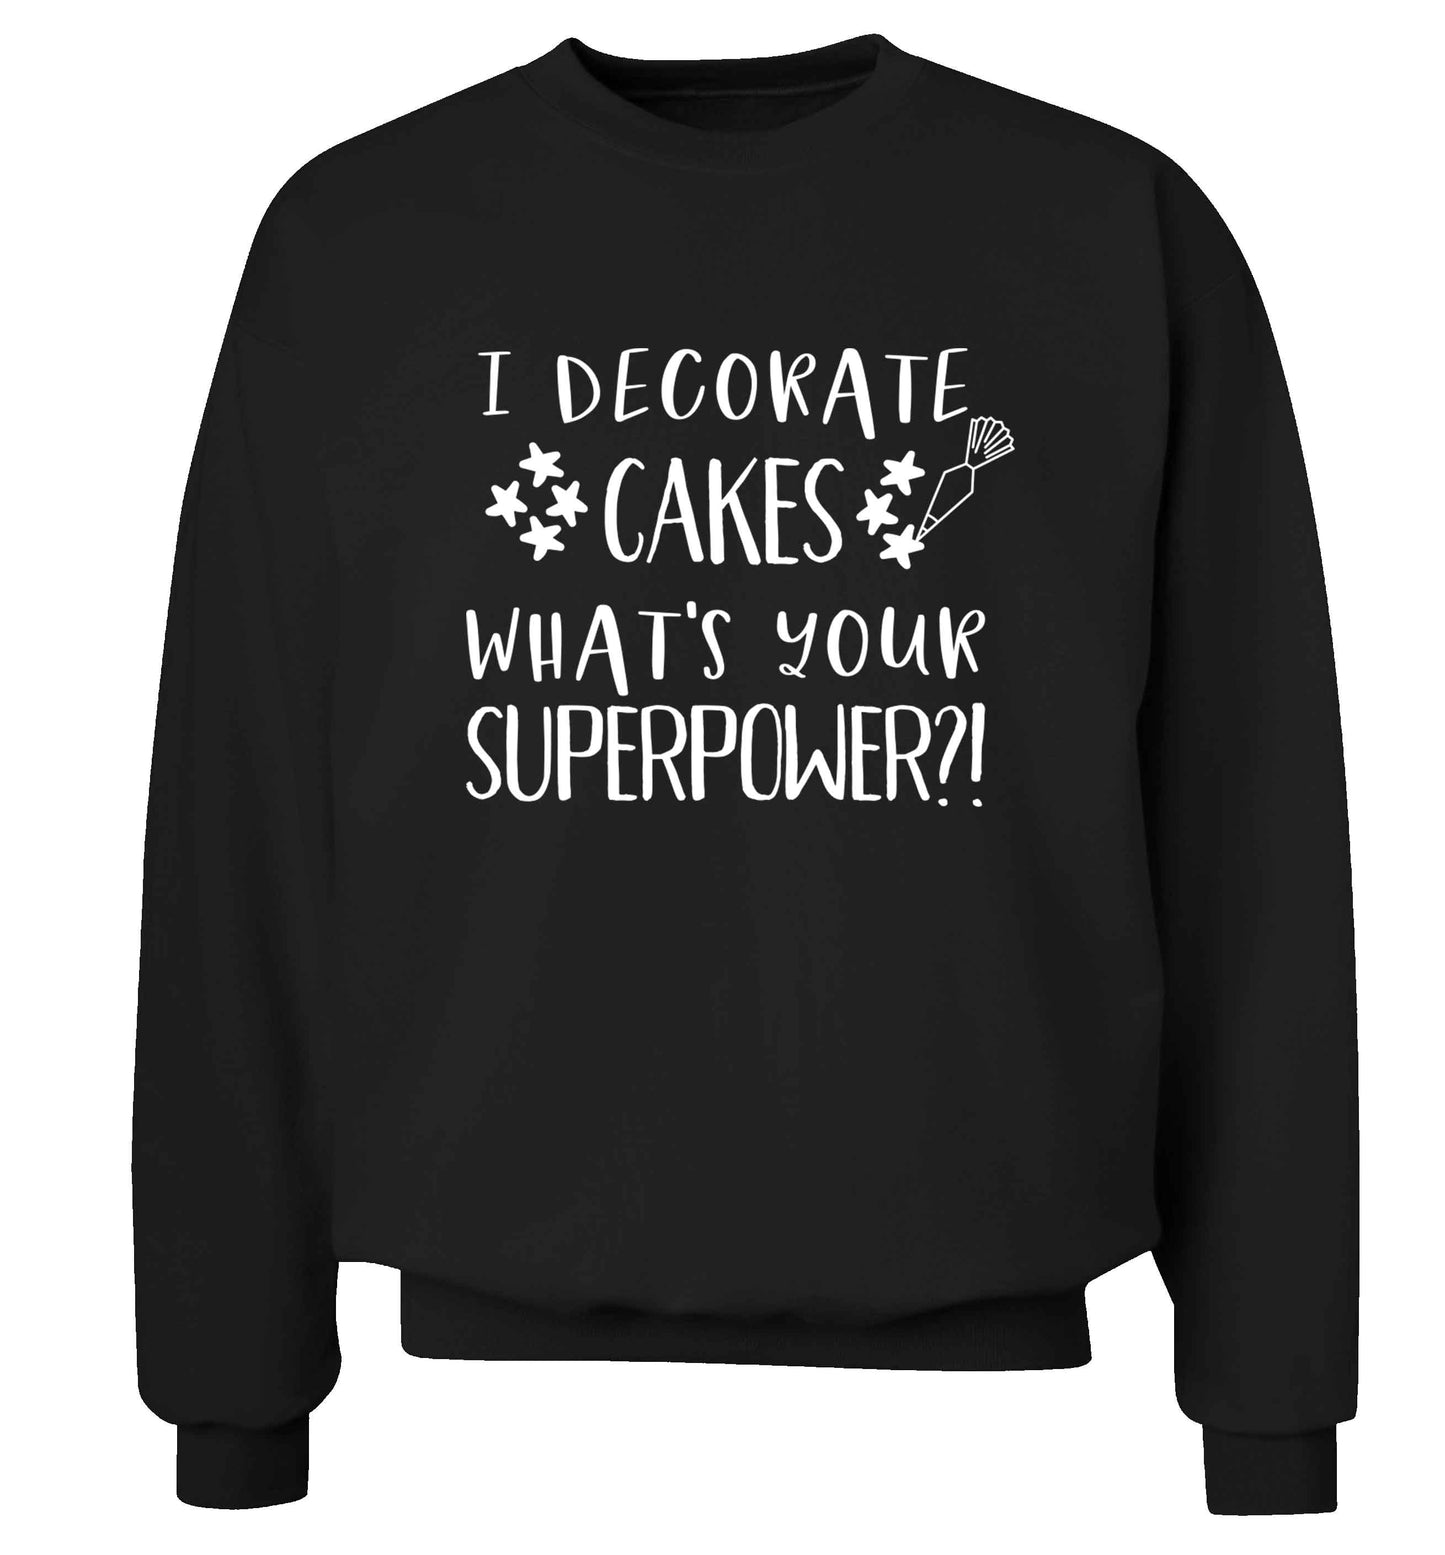 I decorate cakes what's your superpower?! Adult's unisex black Sweater 2XL